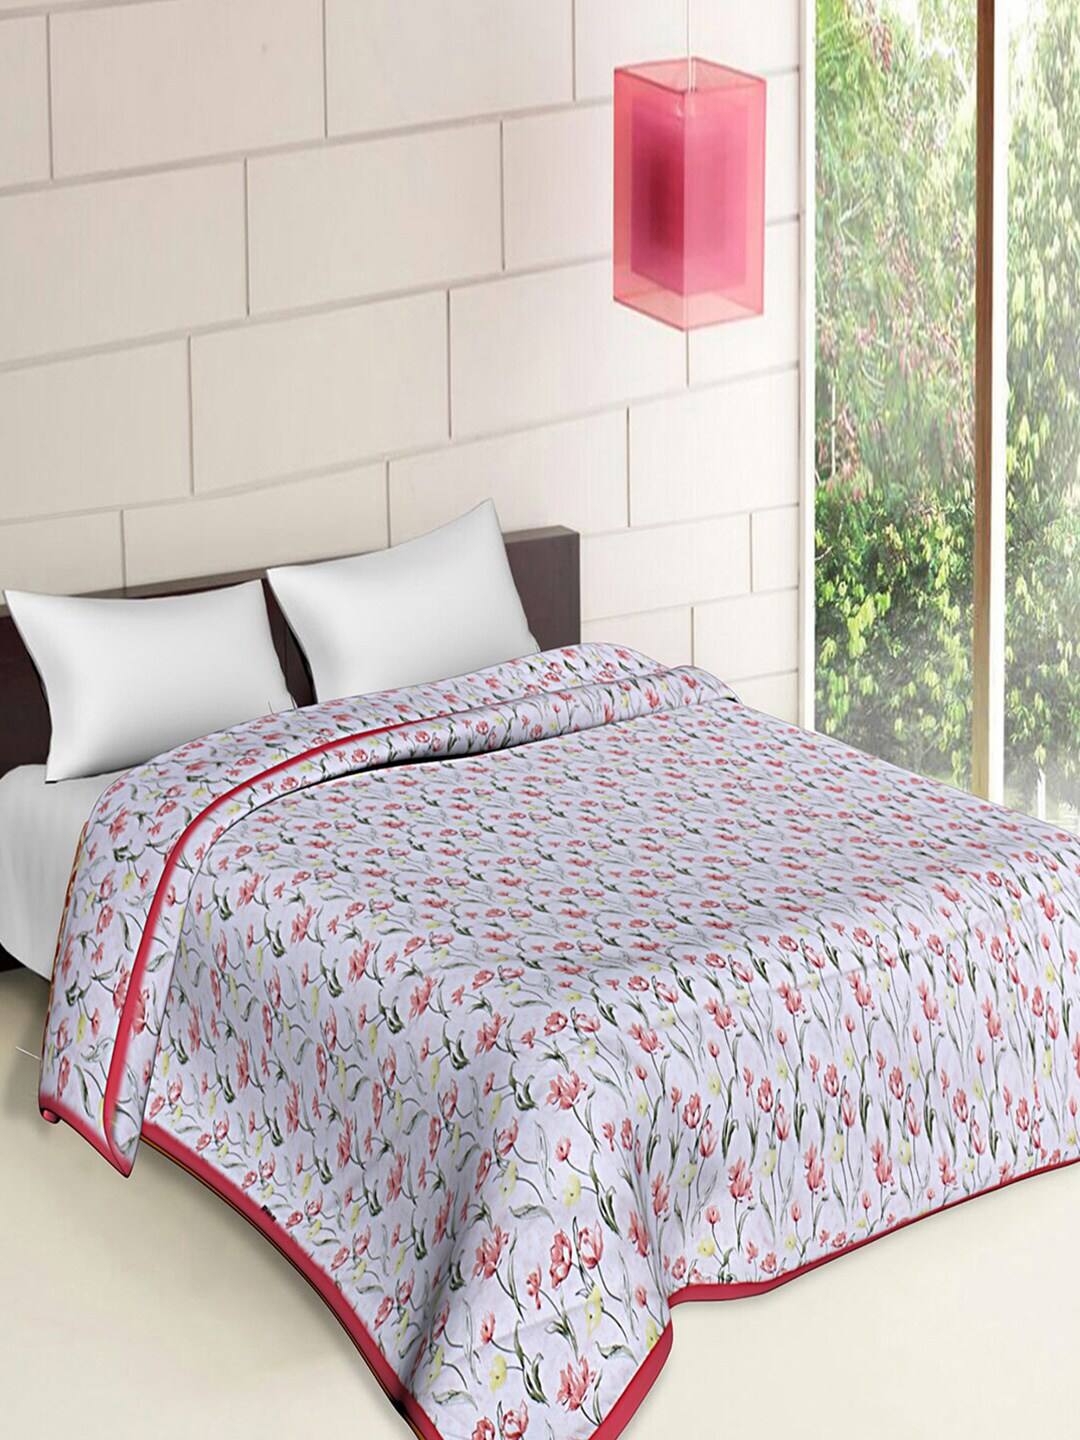 Kuber Industries Pink & White Floral AC Room 300 GSM Double Bed Cotton Blanket Price in India